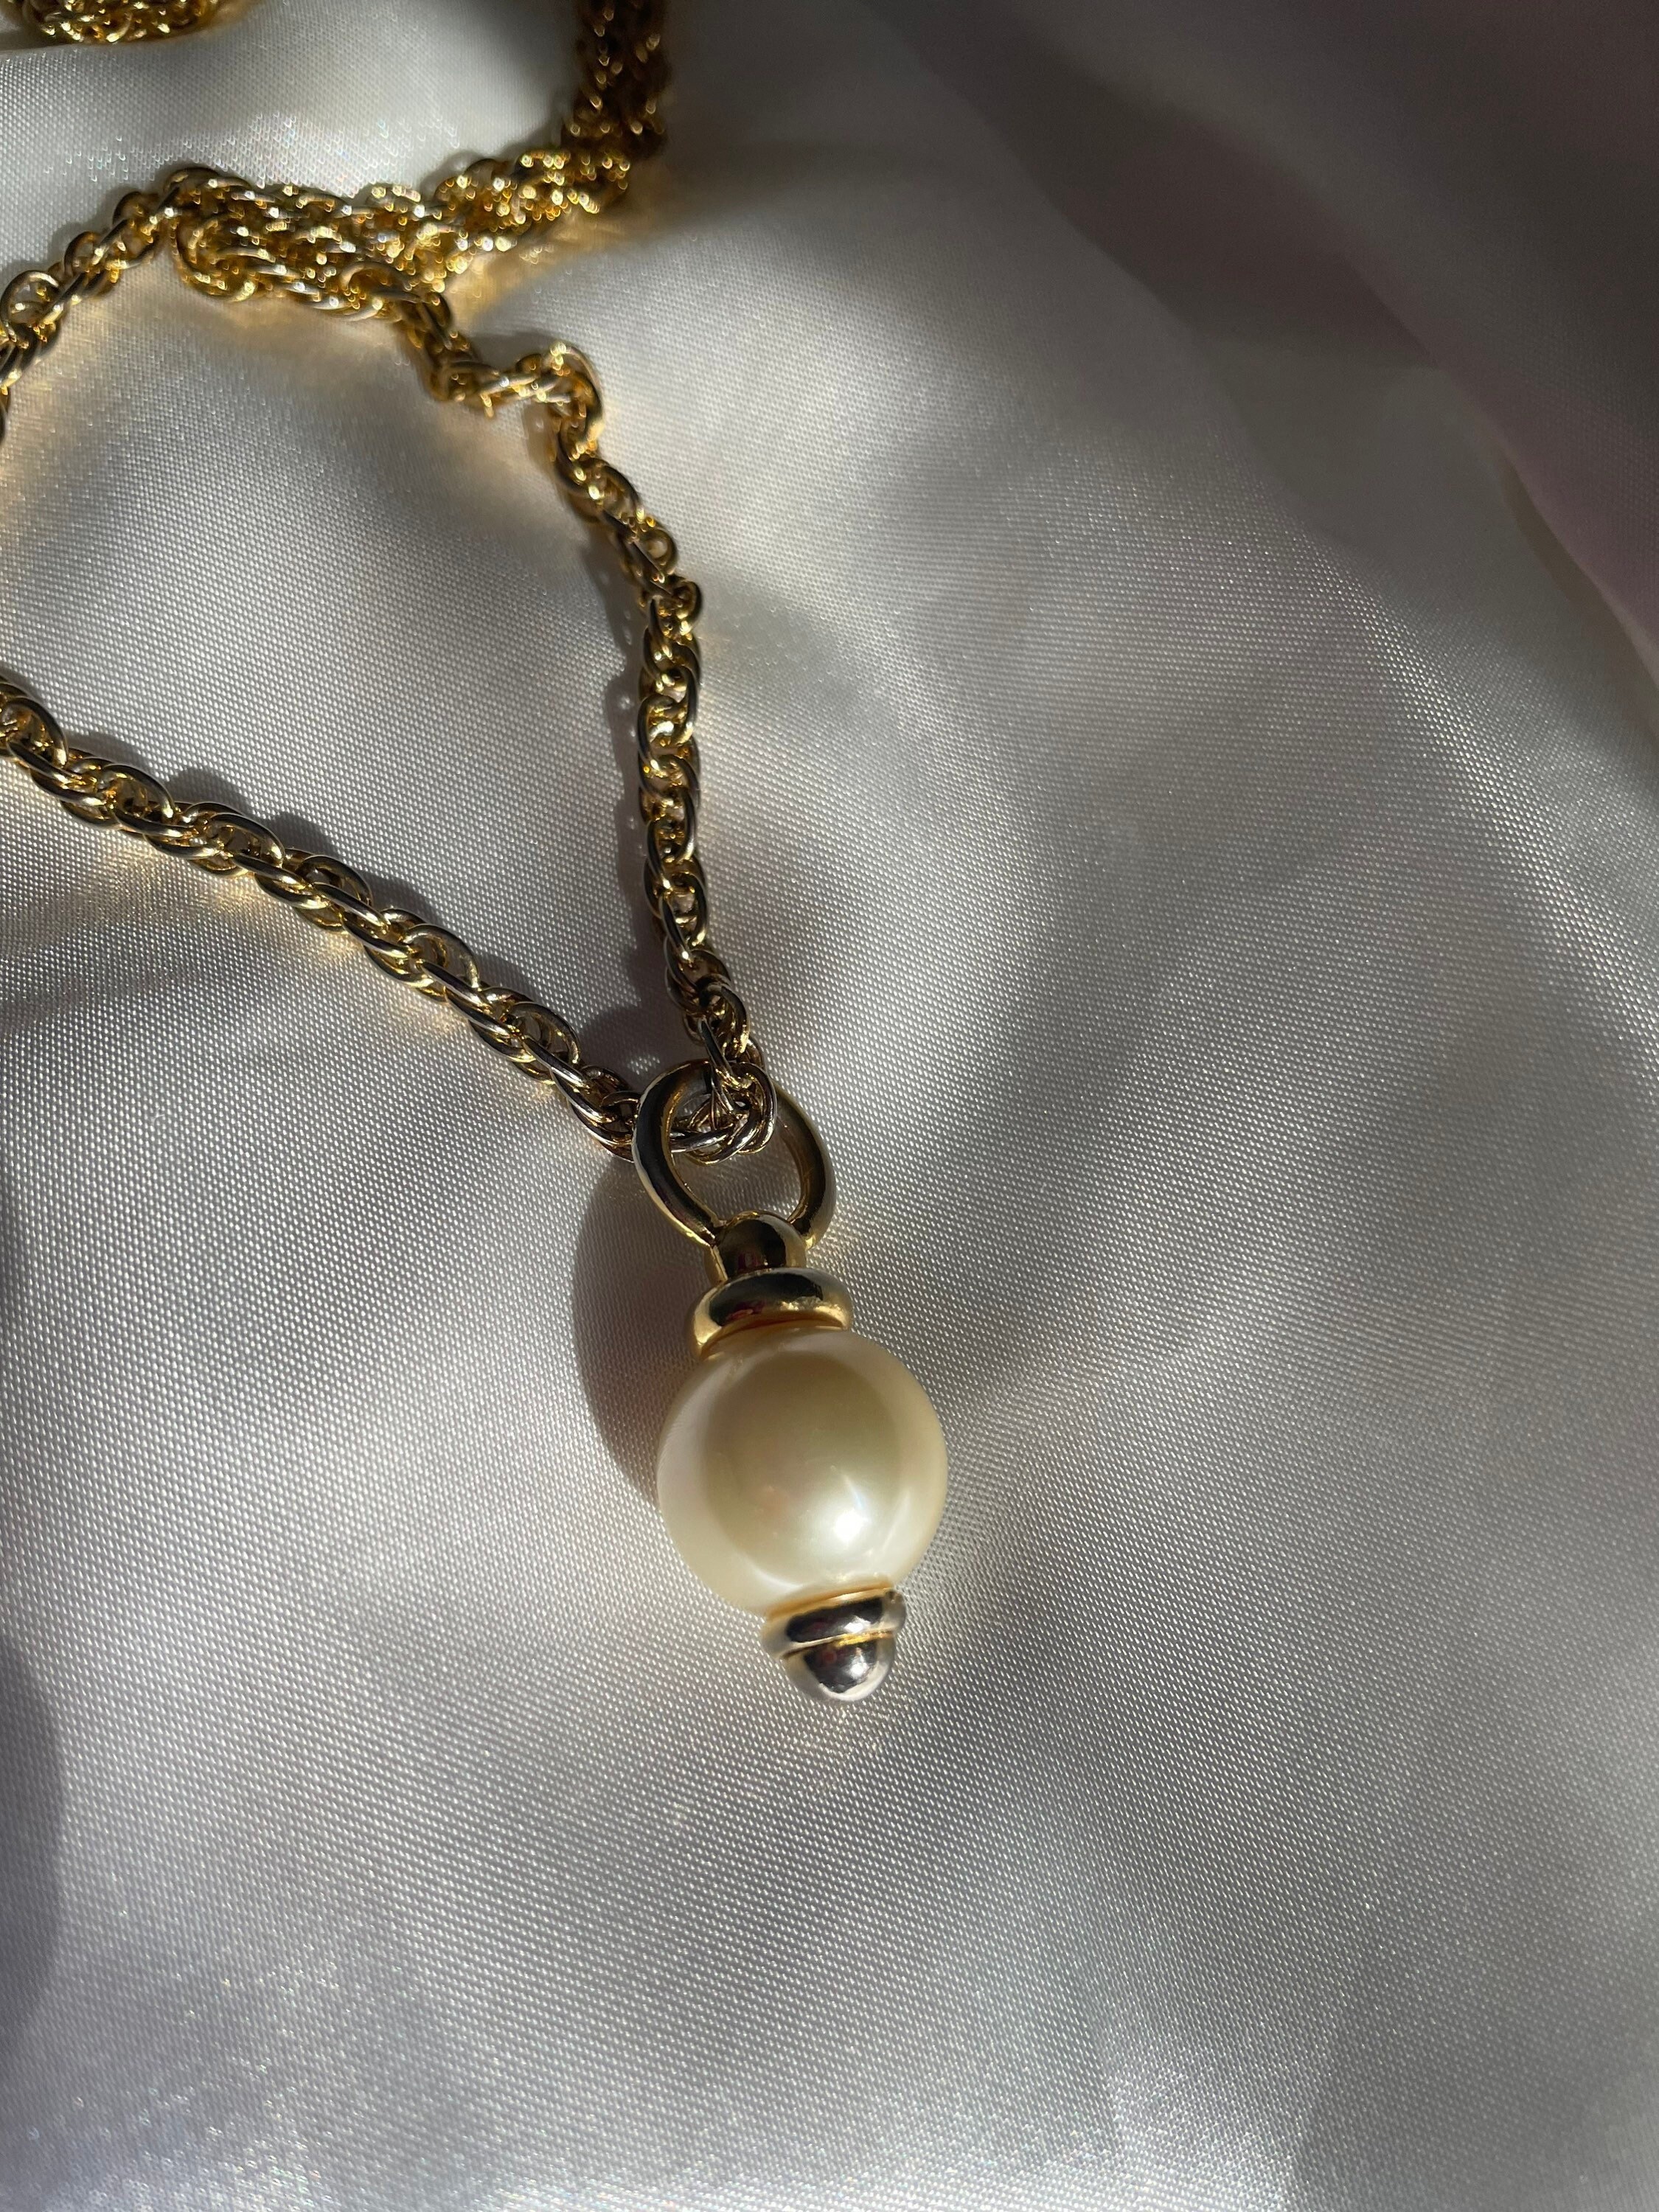 Louis - Half-articulated Louis Vuitton pendant in yellow gold and cultured  pearl - For - Soufflot - ep_vintage luxury Store - Yellow – dct - Hand -  Vuitton - Pouch - Epi - Tasili - Bag